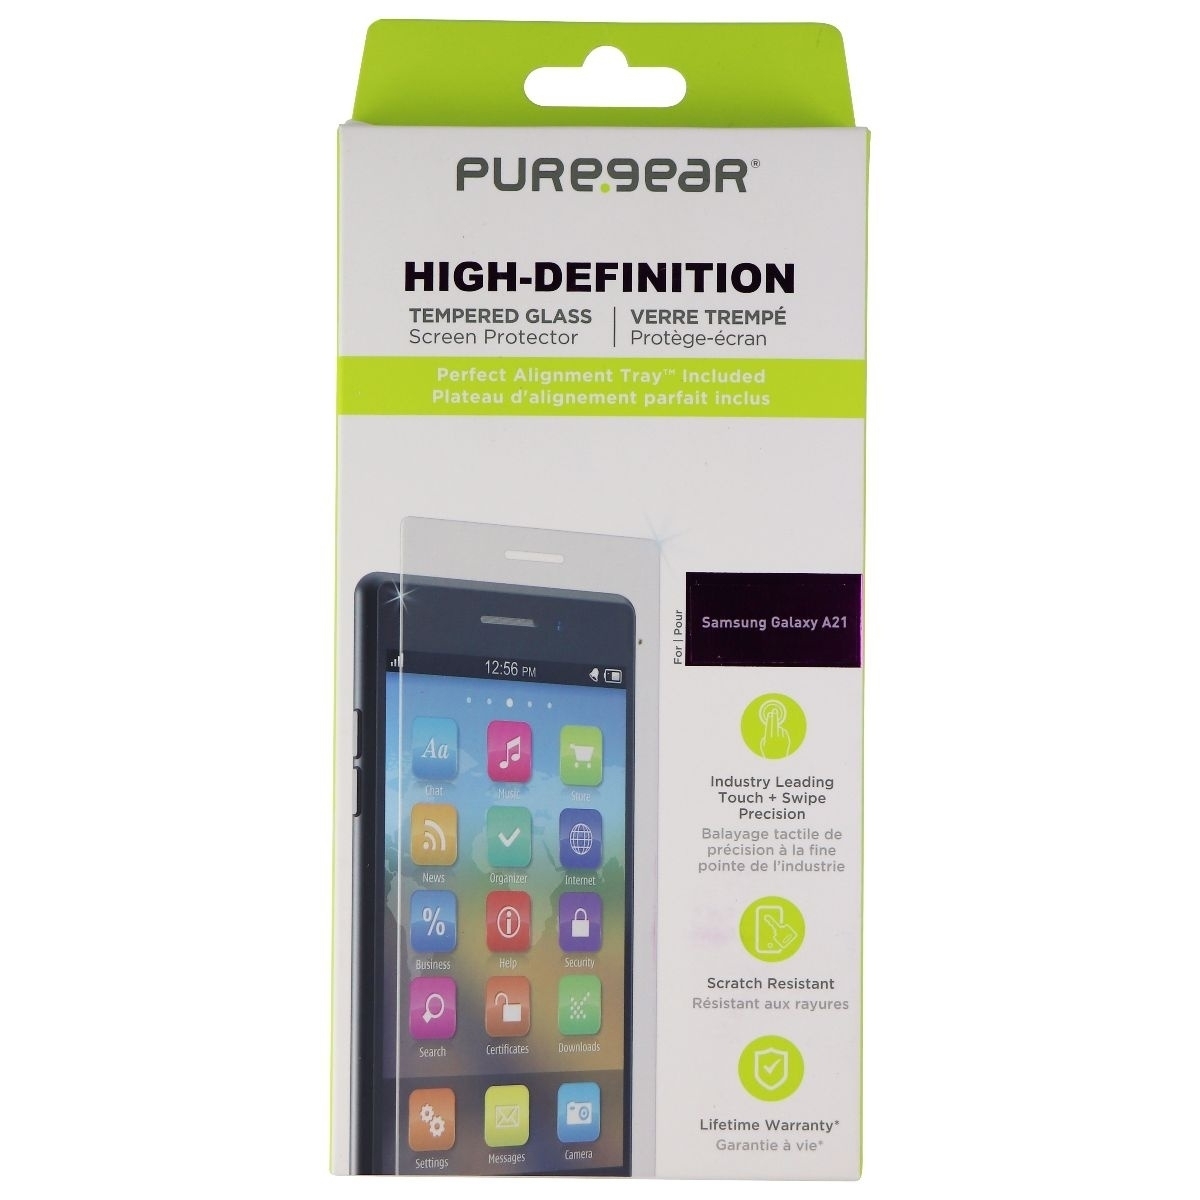 PureGear HD Tempered Glass Screen For Samsung Galaxy A21 Smartphones - Clear